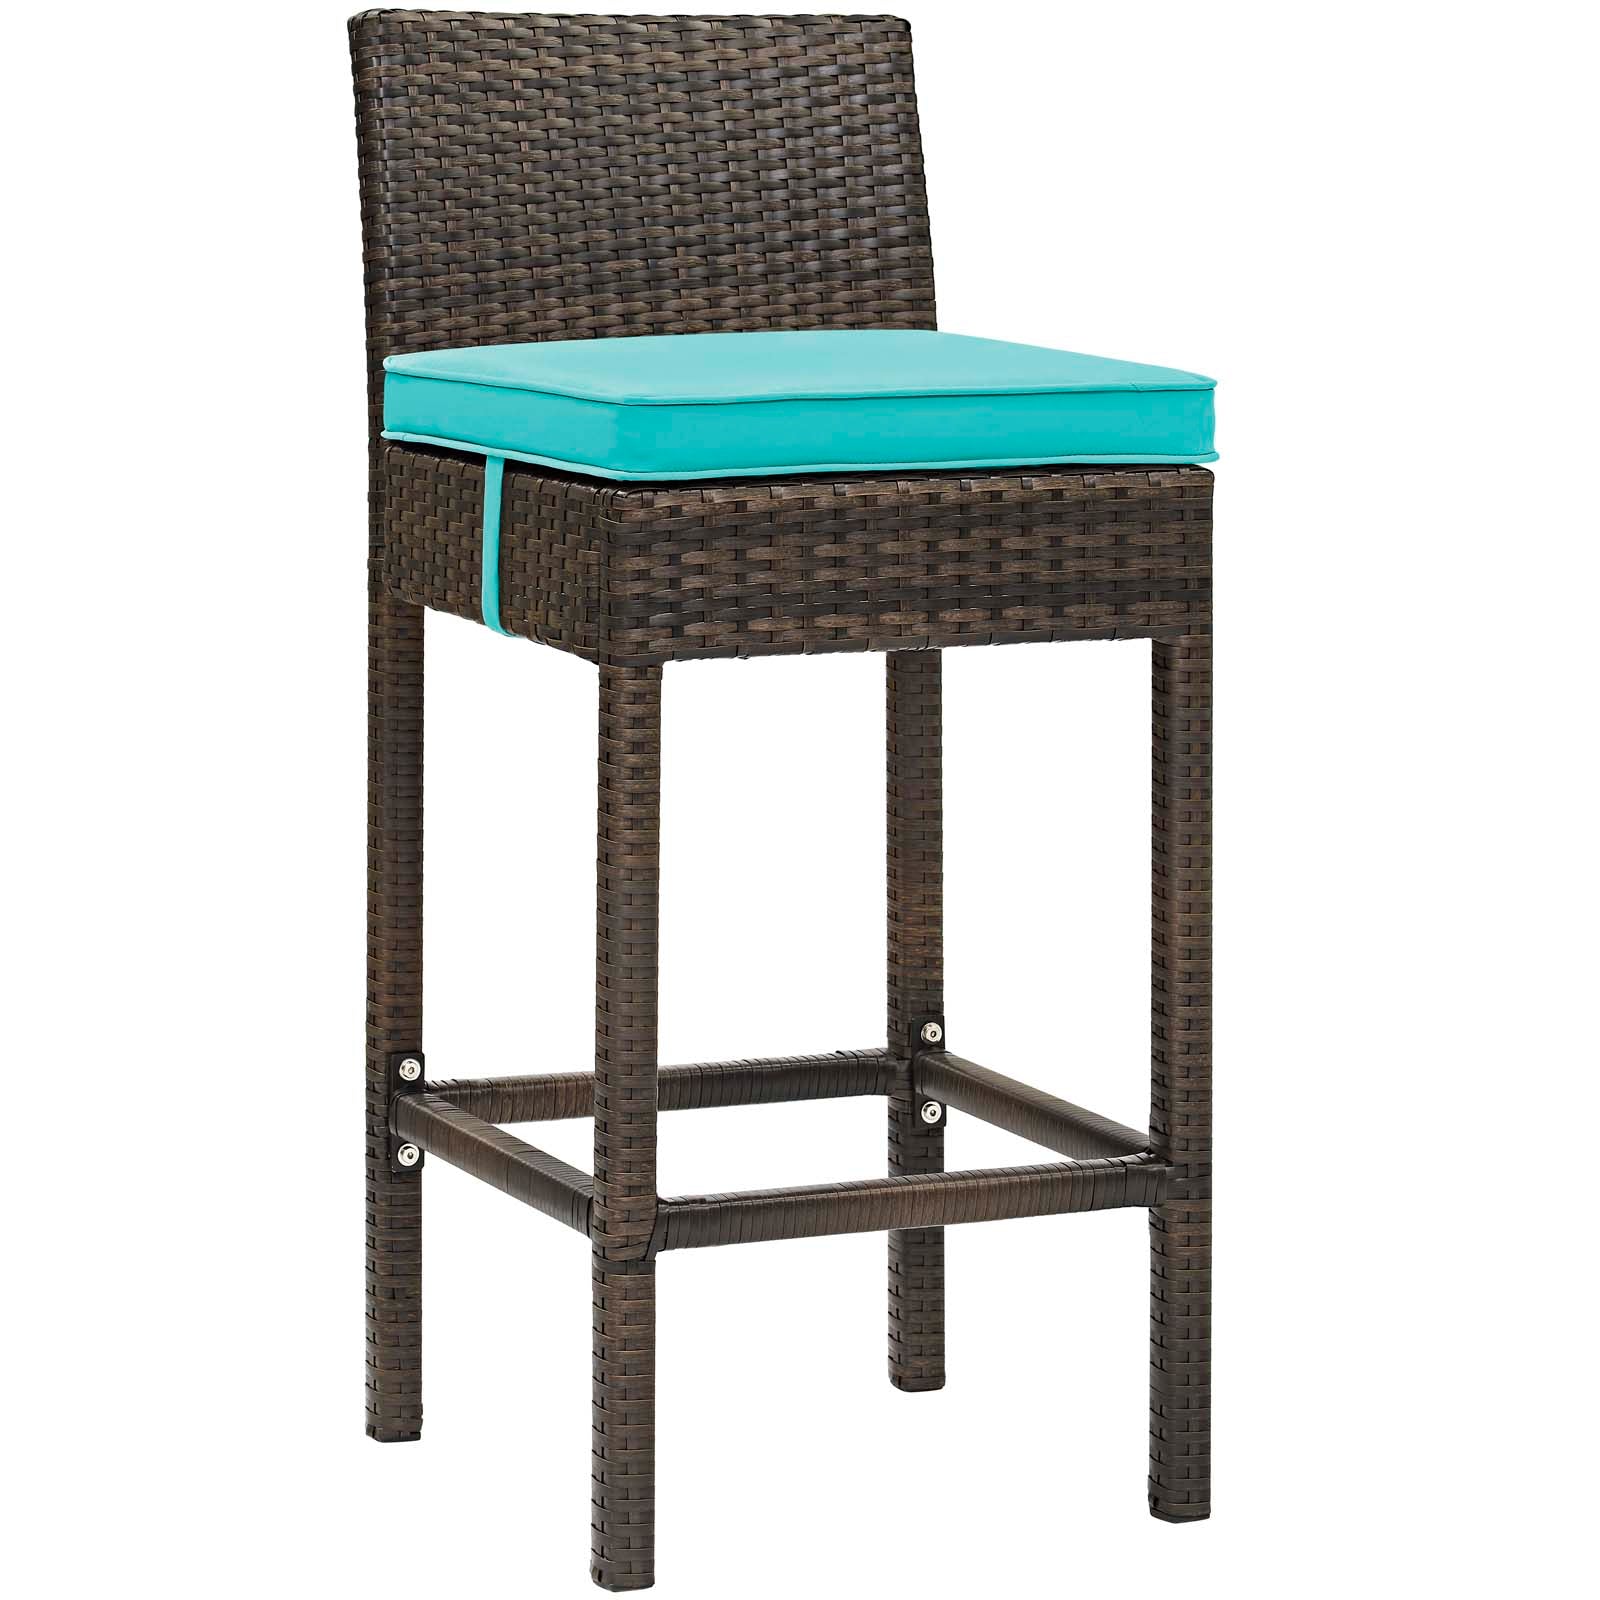 Modway Outdoor Barstools - Conduit Bar Stool Outdoor Patio Wicker Rattan Set of 2 Brown Turquoise